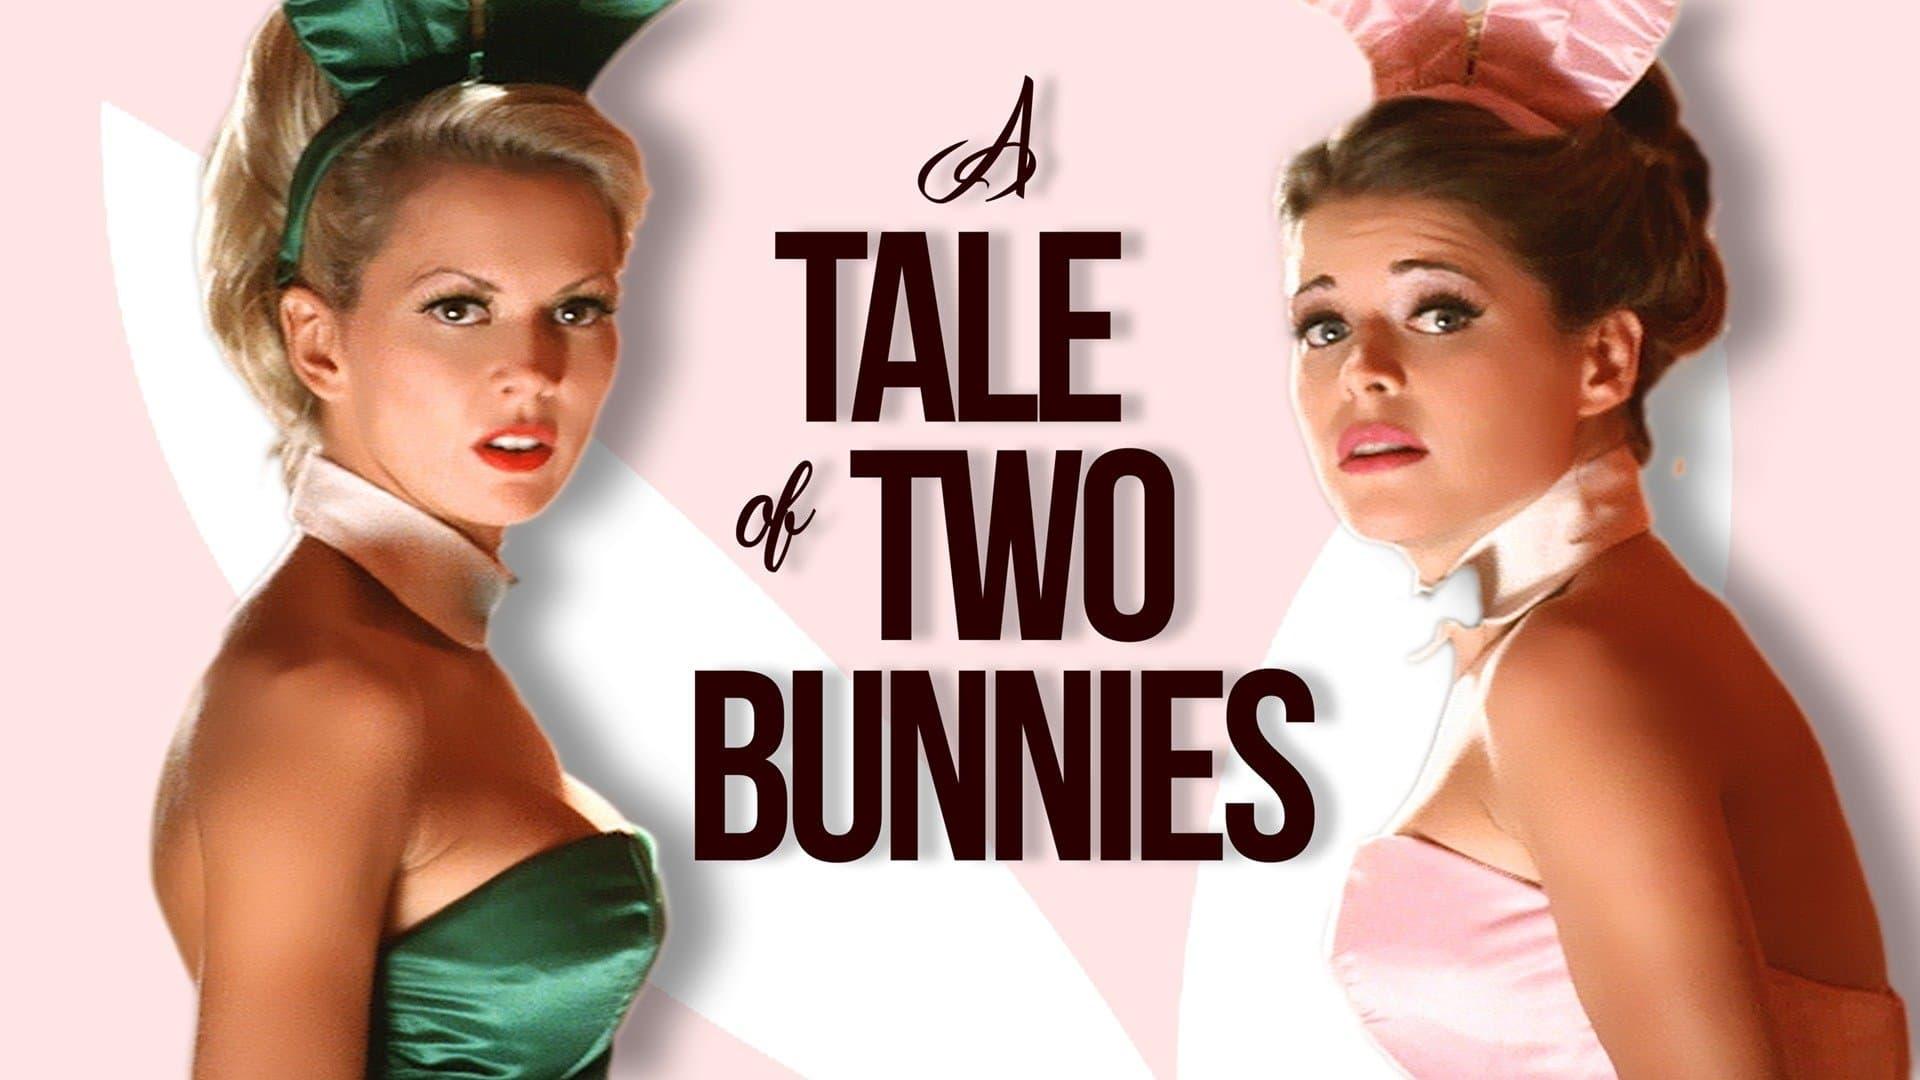 A Tale of Two Bunnies backdrop